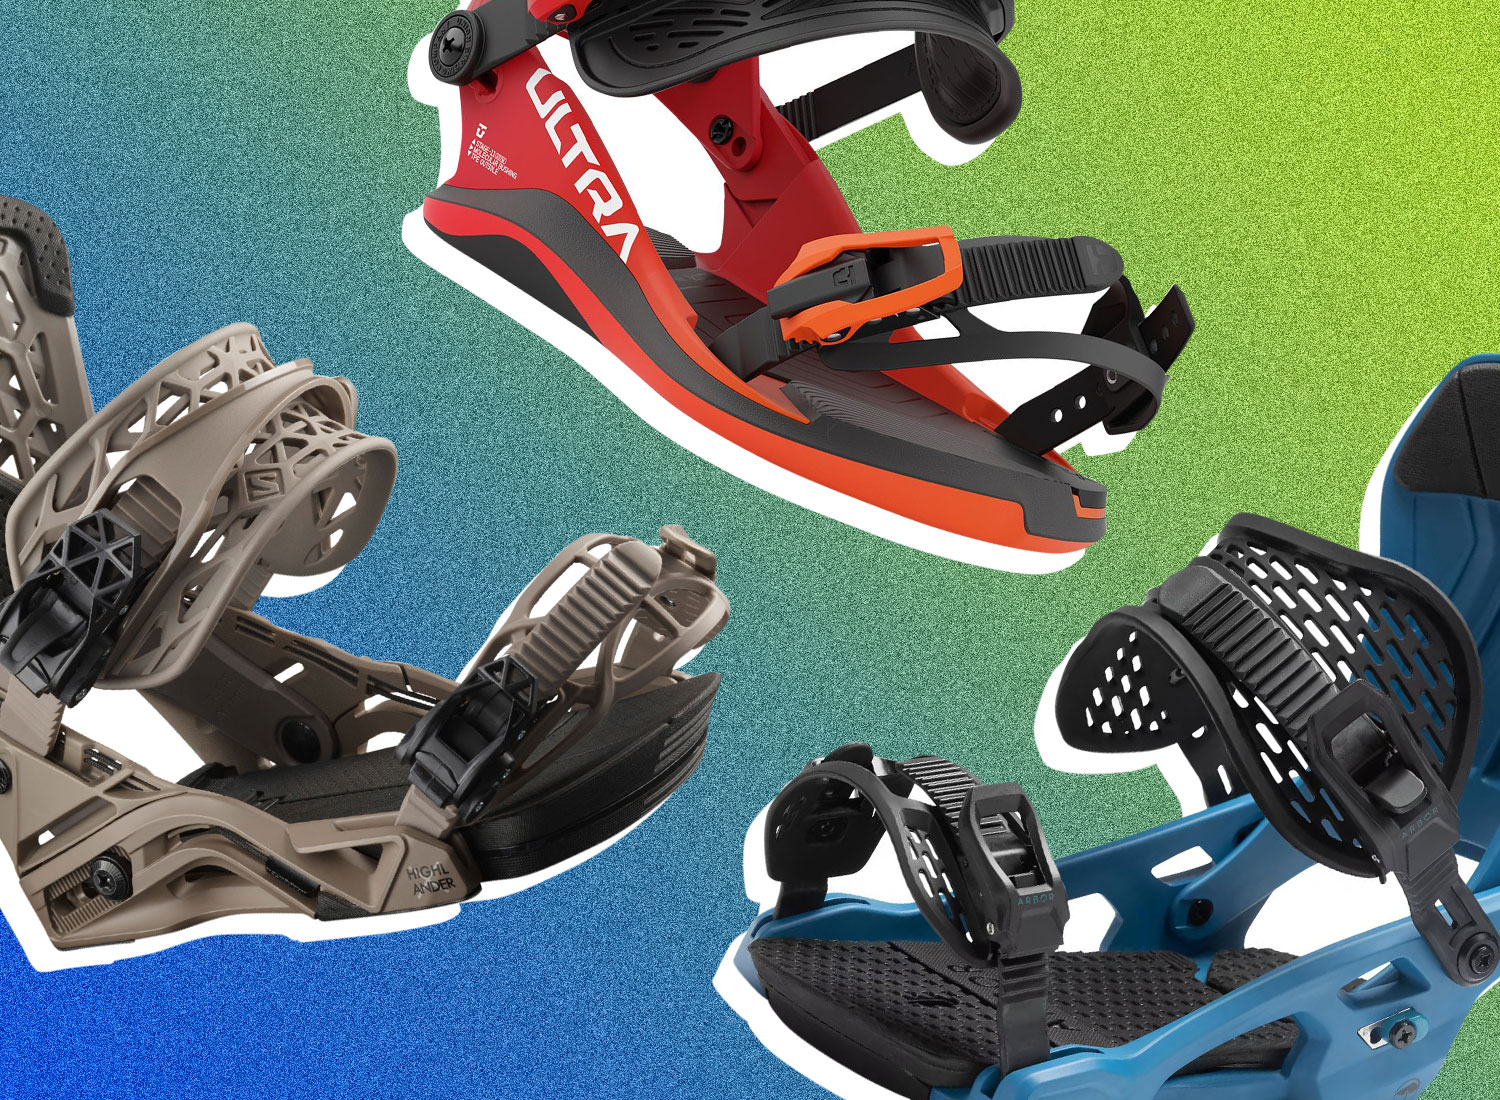 8 Best Snowboard Bindings To Stick & Rip Into 2023